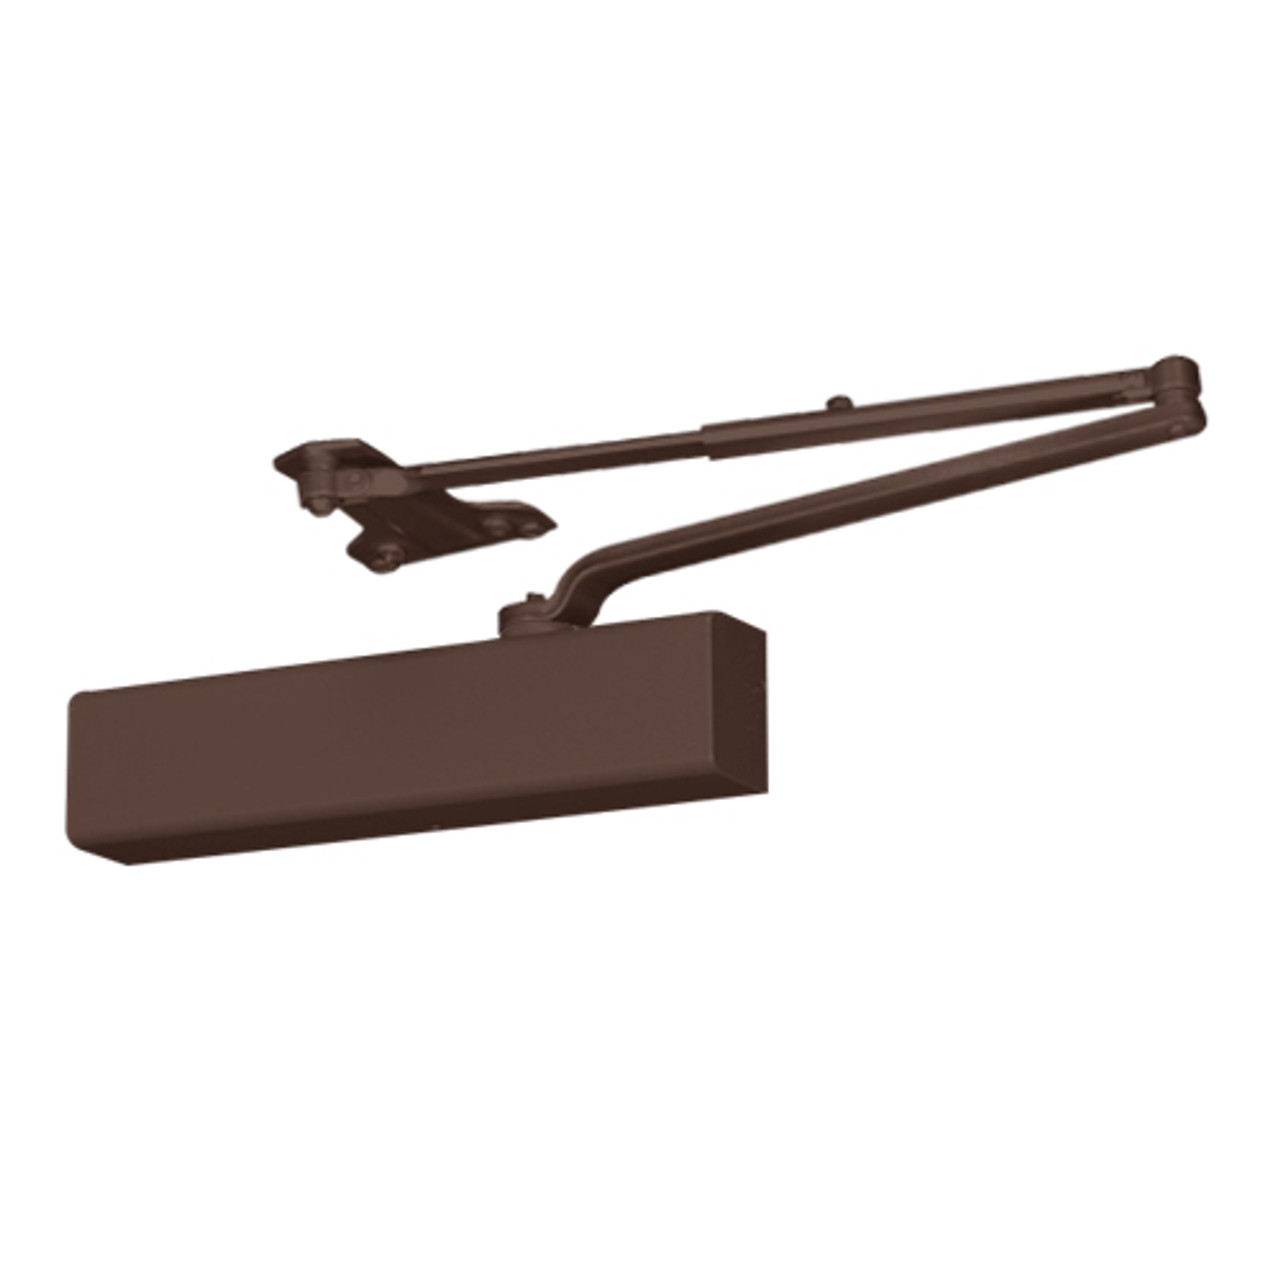 P8581A-690 Norton 8000 Series Full Cover Non-Hold Open Door Closers with Parallel Low Profile Arm in Statuary Bronze Finish